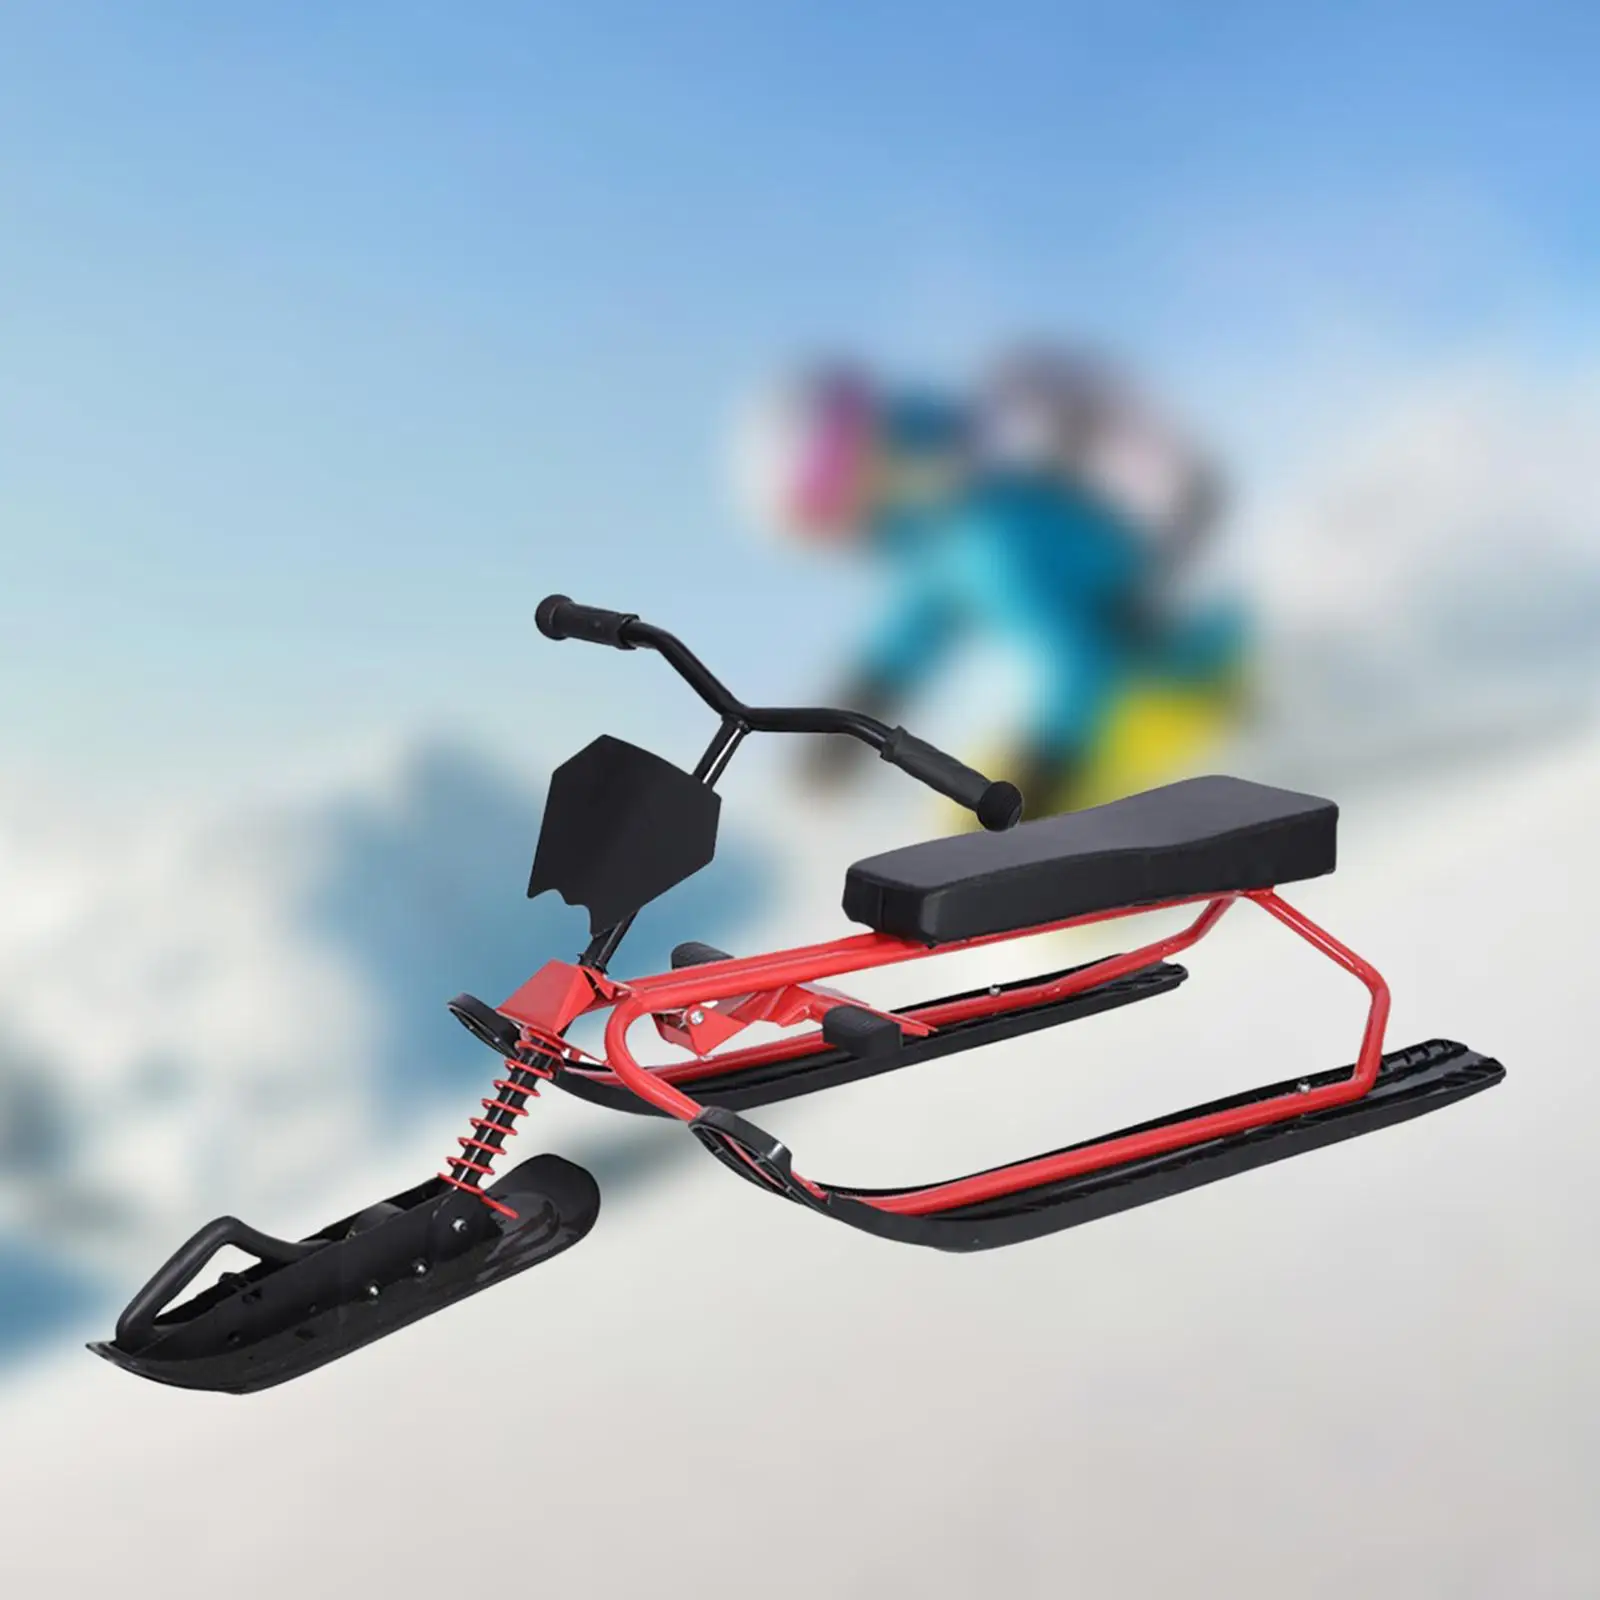 Snow Racer Sled with Steering Wheel and Twin Brakes Sleigh for Winter Sports